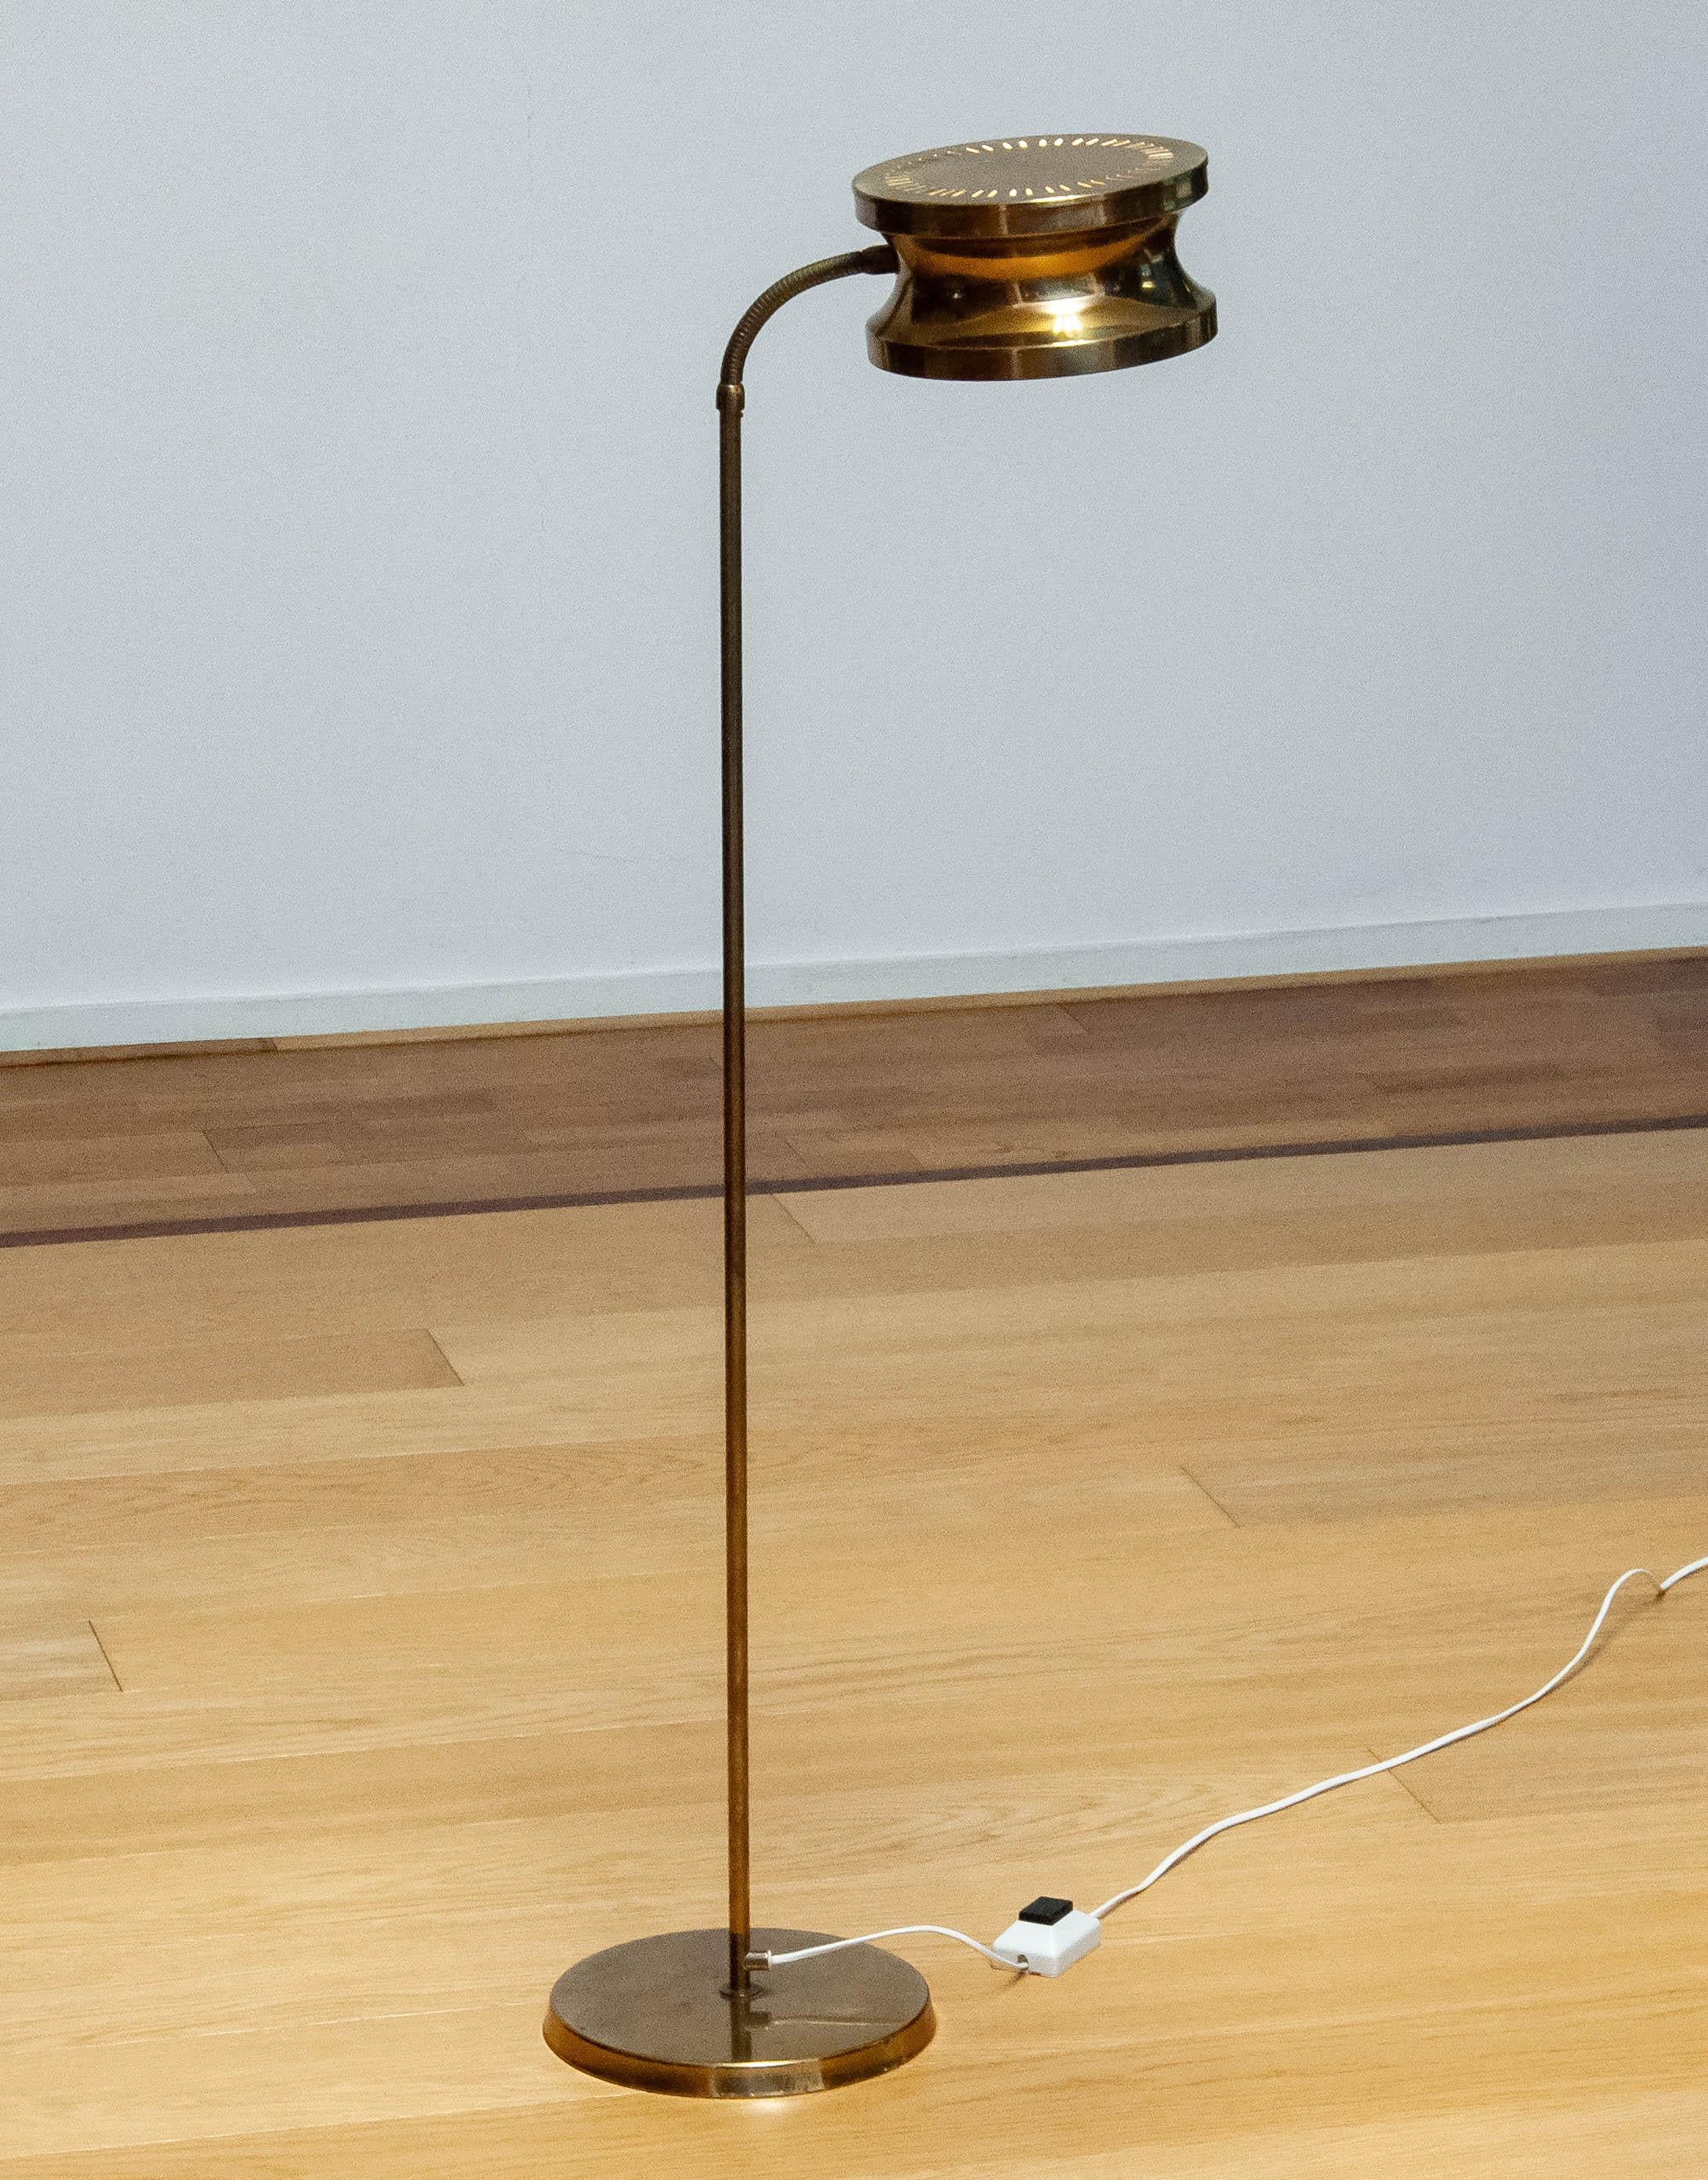 Beautiful Scandinavian Modern floor lamp in polished brass made in Sweden in the 1970s by Tyringe Konsthantverk which suits in many interiors. Once switched on the perforated lamp shade gives this floor lamp her characteristic appearance which is a